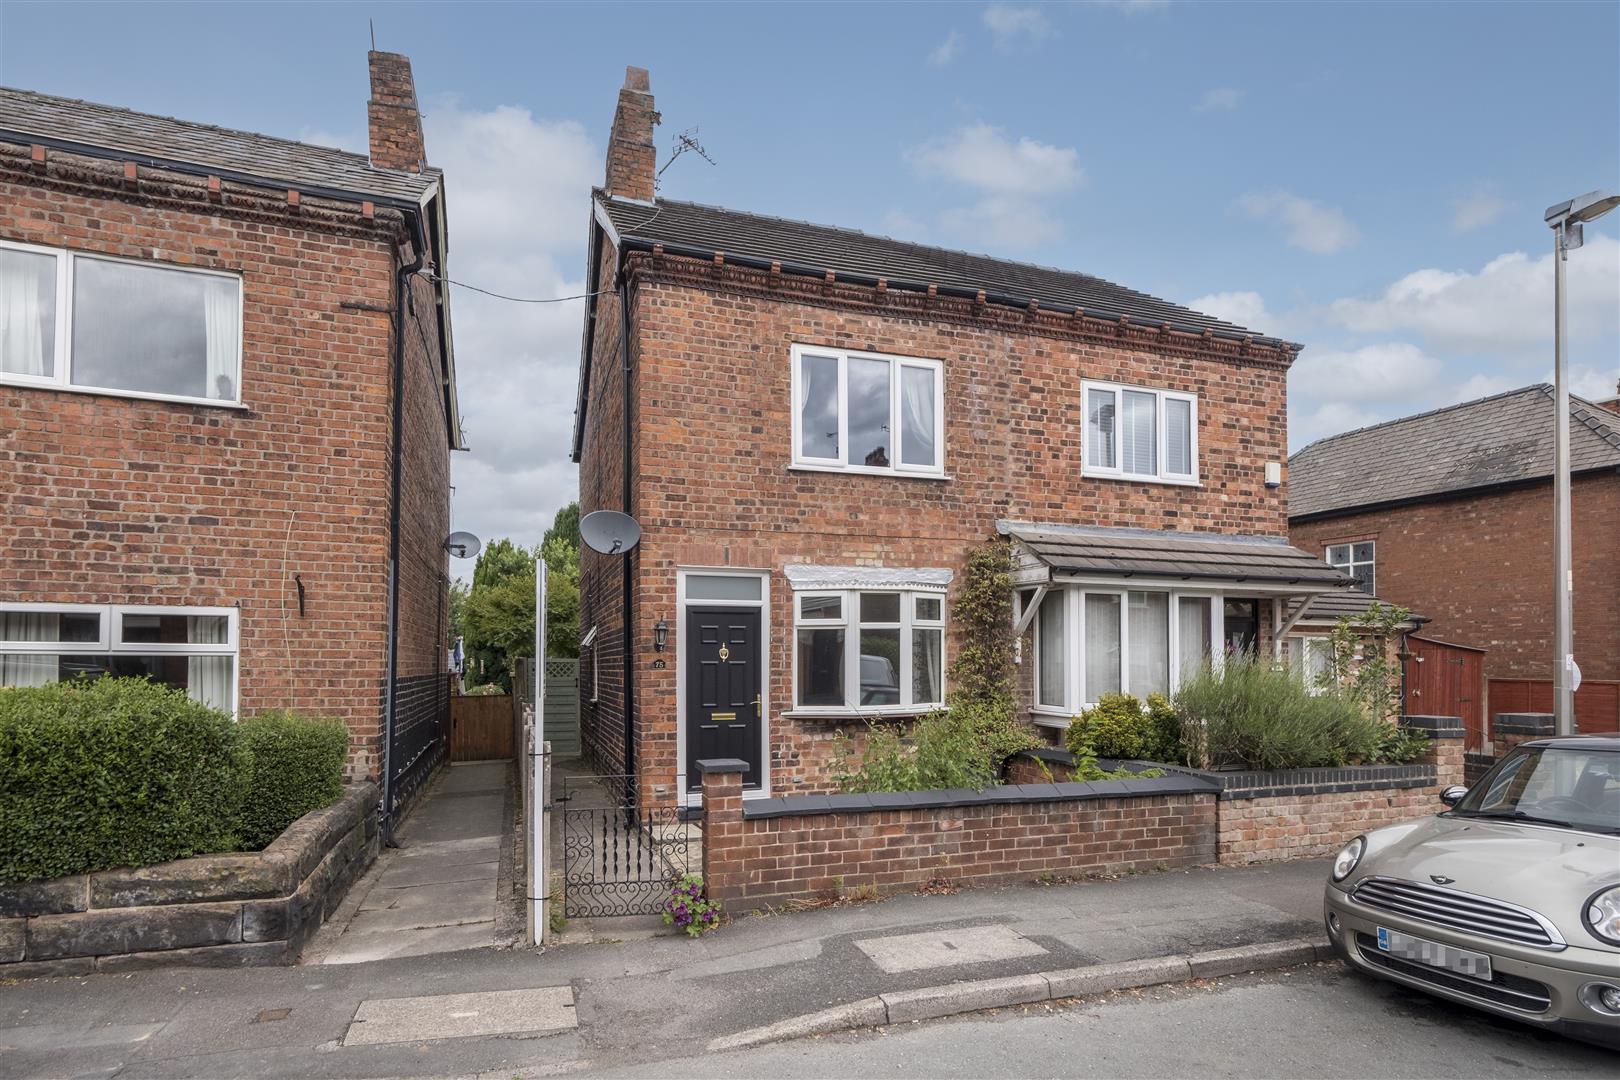 2 bedroom  Semi Detached House for Sale in Barnton